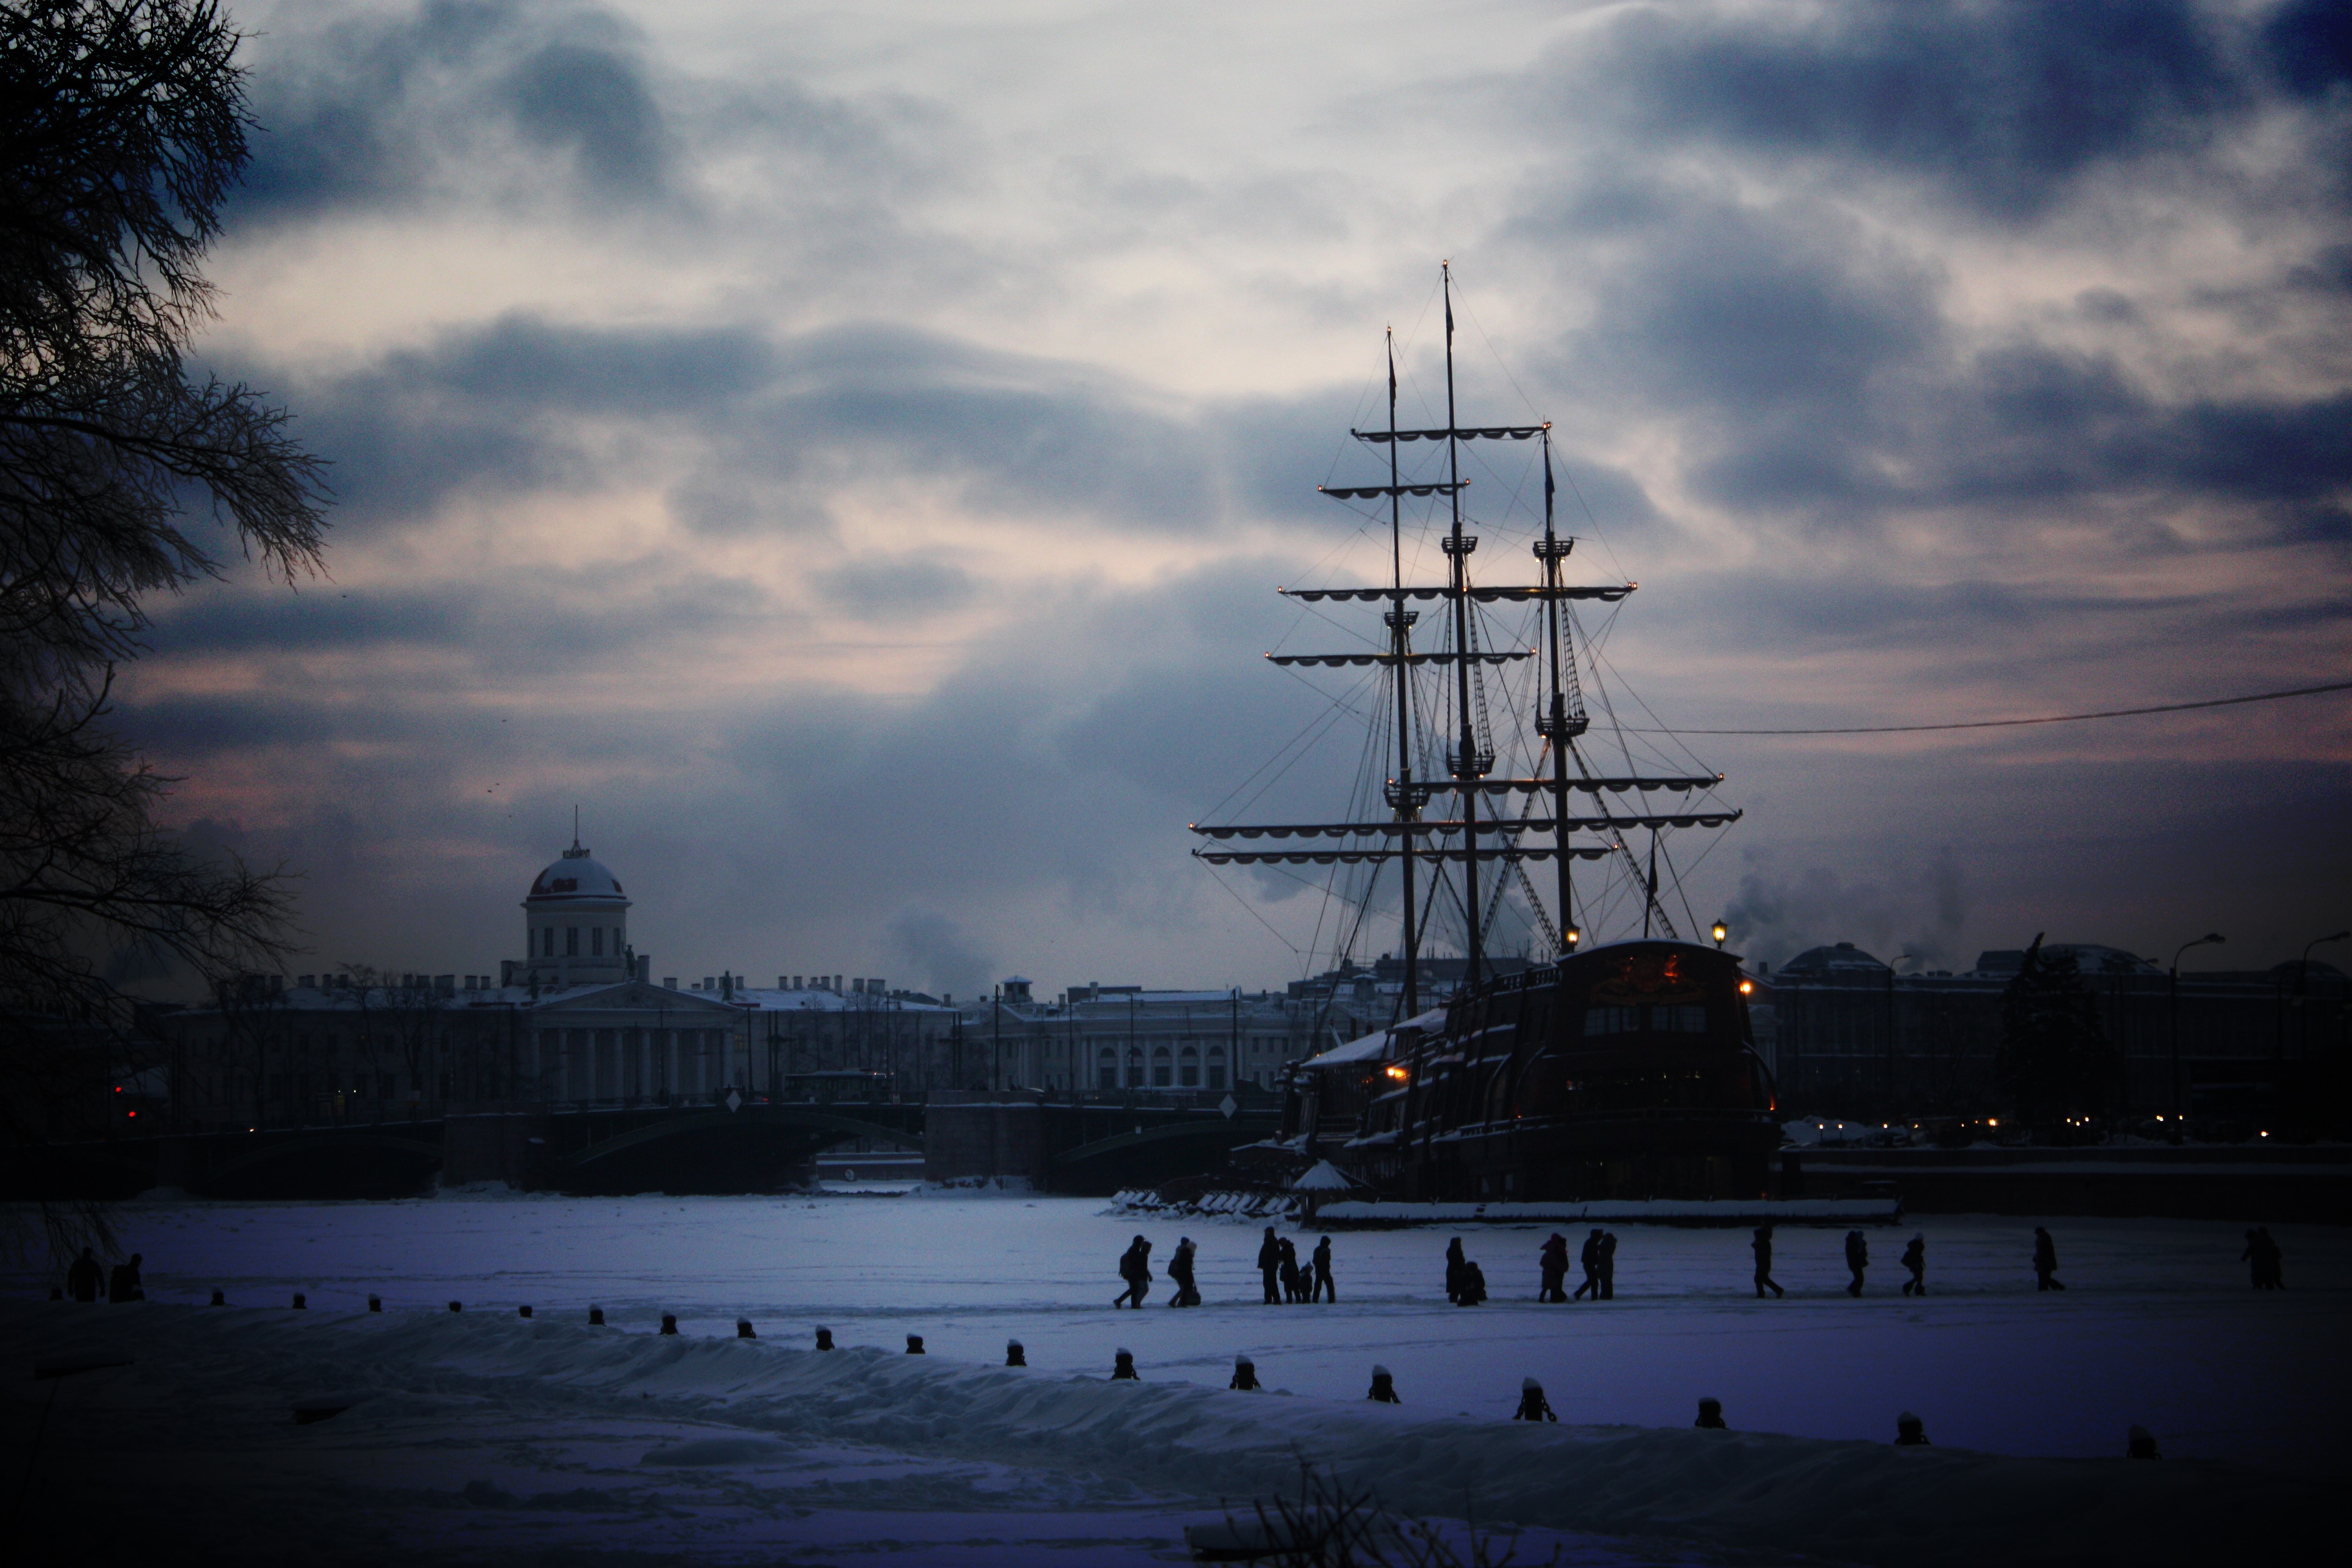 General 4272x2848 sailing ship water sea St. Petersburg Russia river winter snow frozen river clouds people city lights cityscape evening old building walking architecture bridge rigging (ship) low light